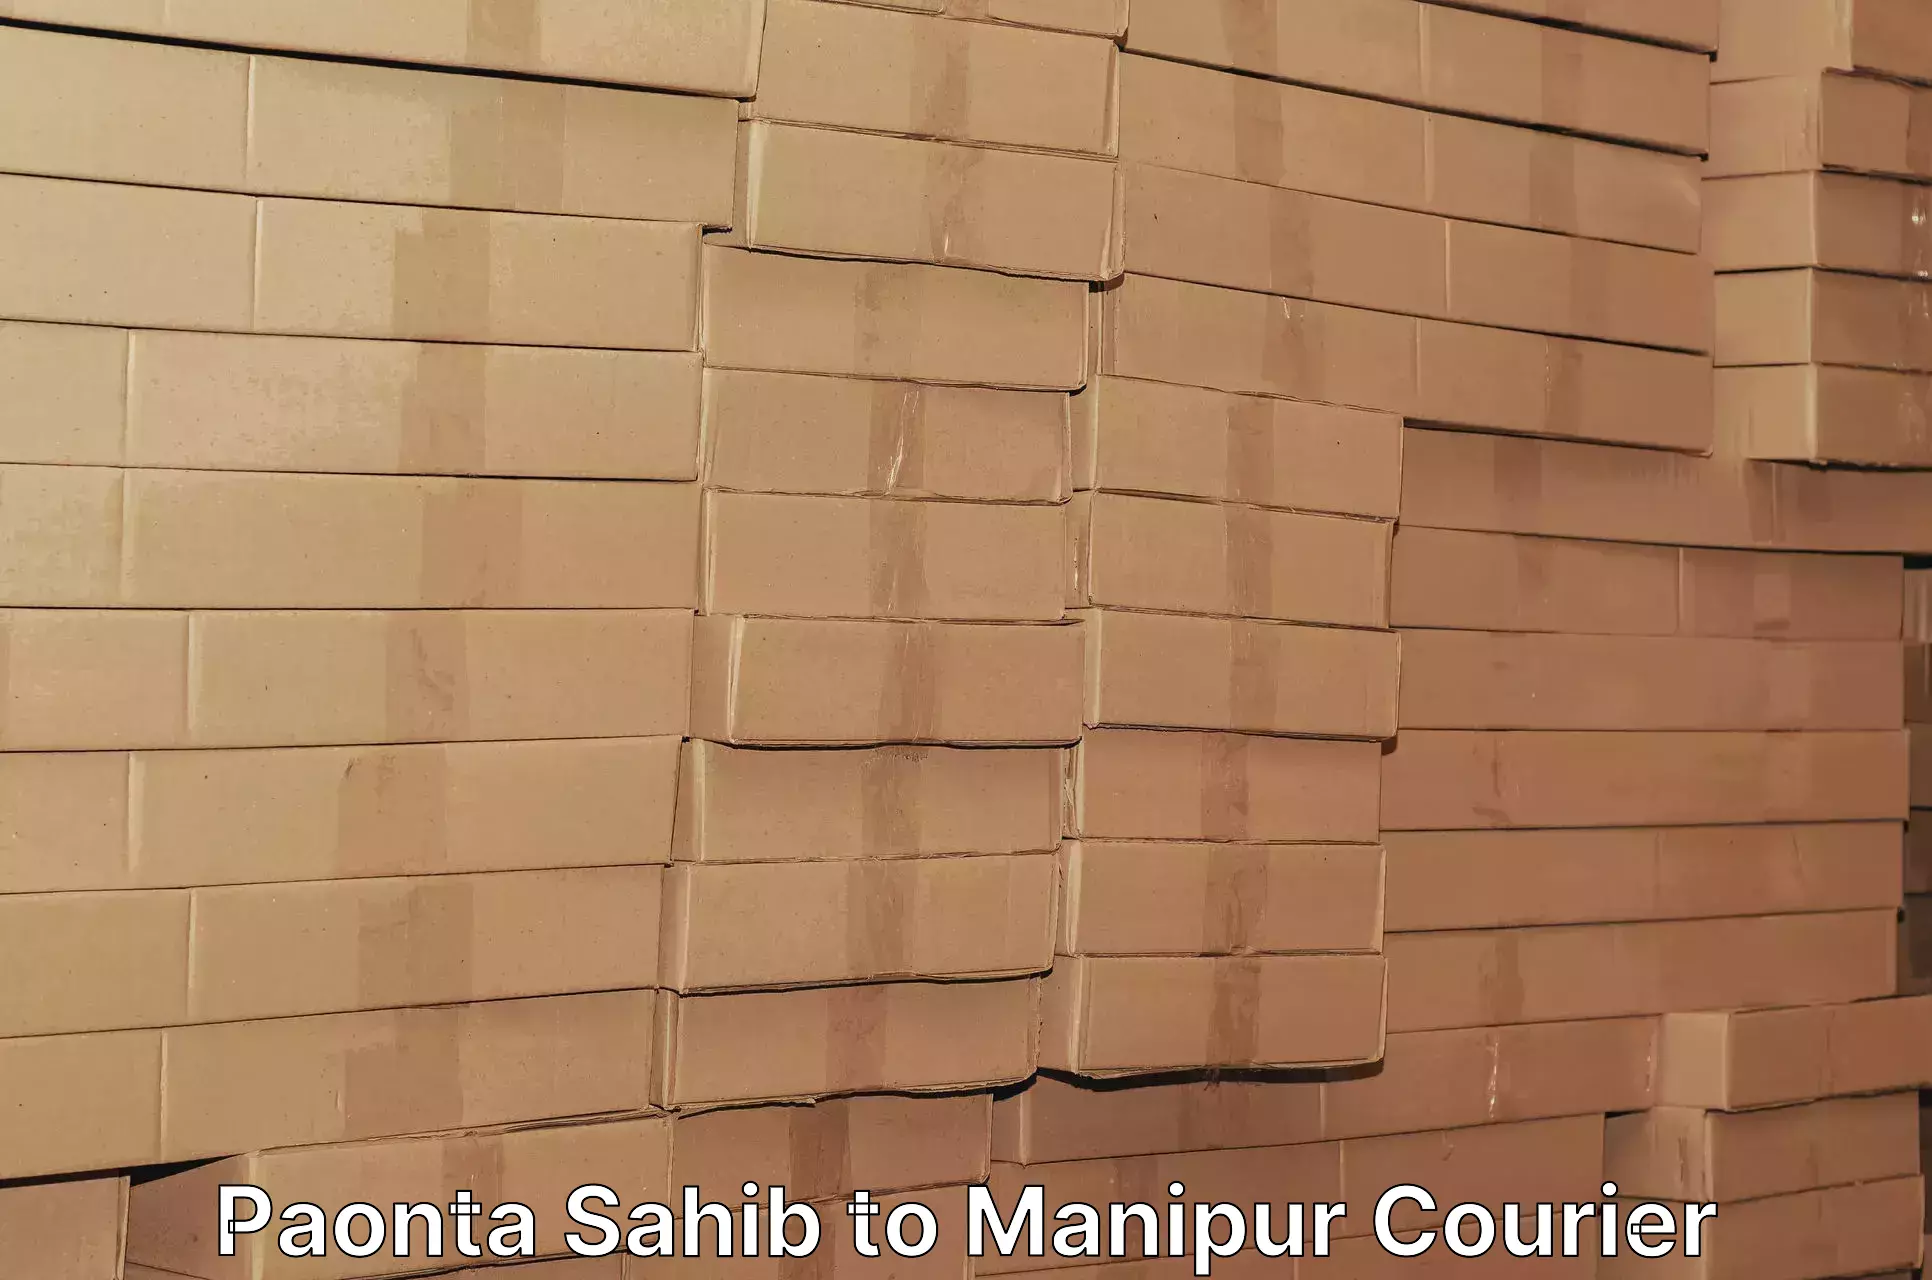 Reliable shipping partners Paonta Sahib to Manipur